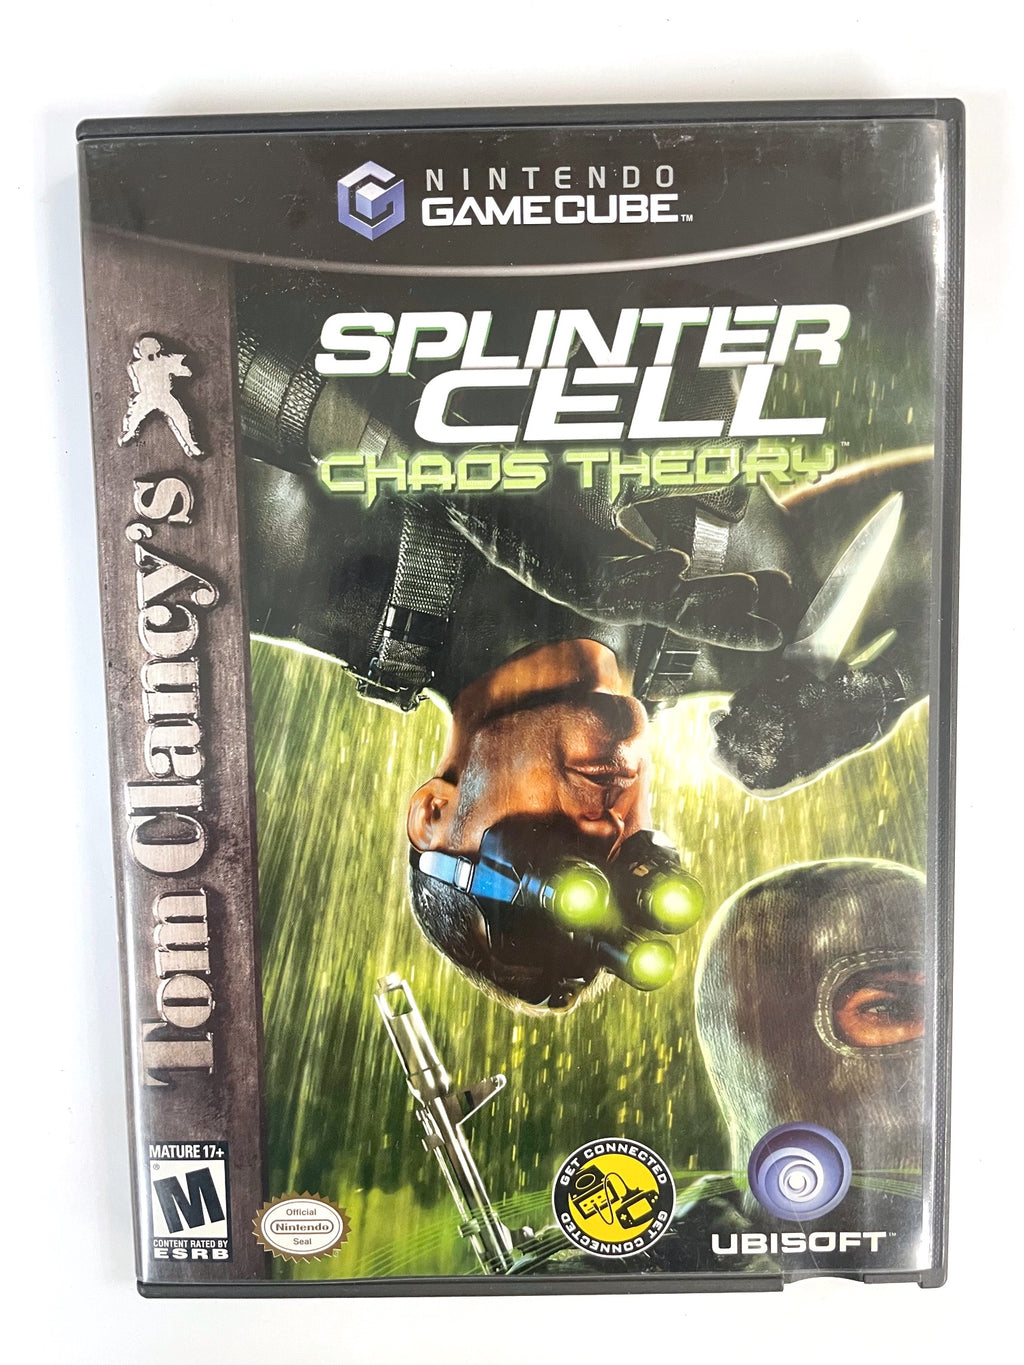 Buy Tom Clancy's Splinter Cell: Chaos Theory for GAMECUBE